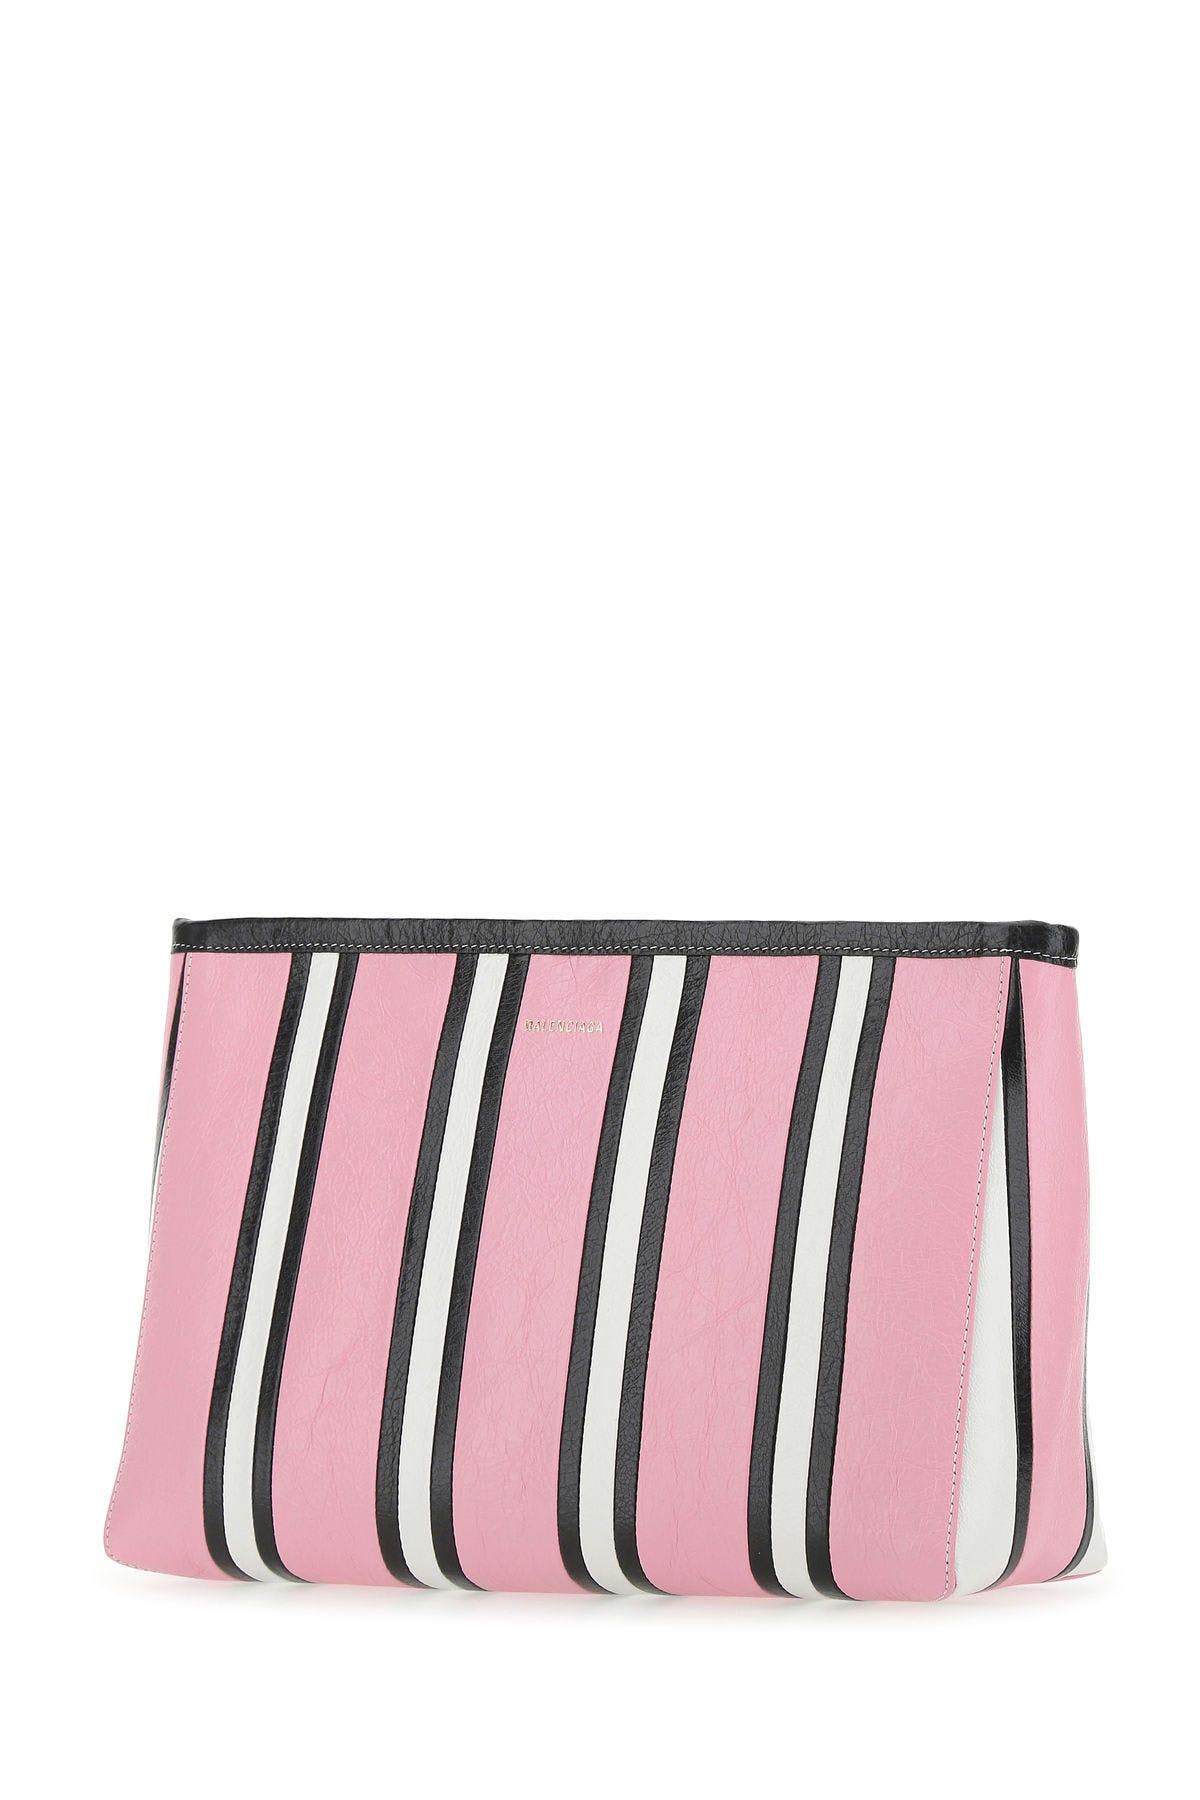 Shop Balenciaga Multicolor Leather Barbes Clutch In Pink